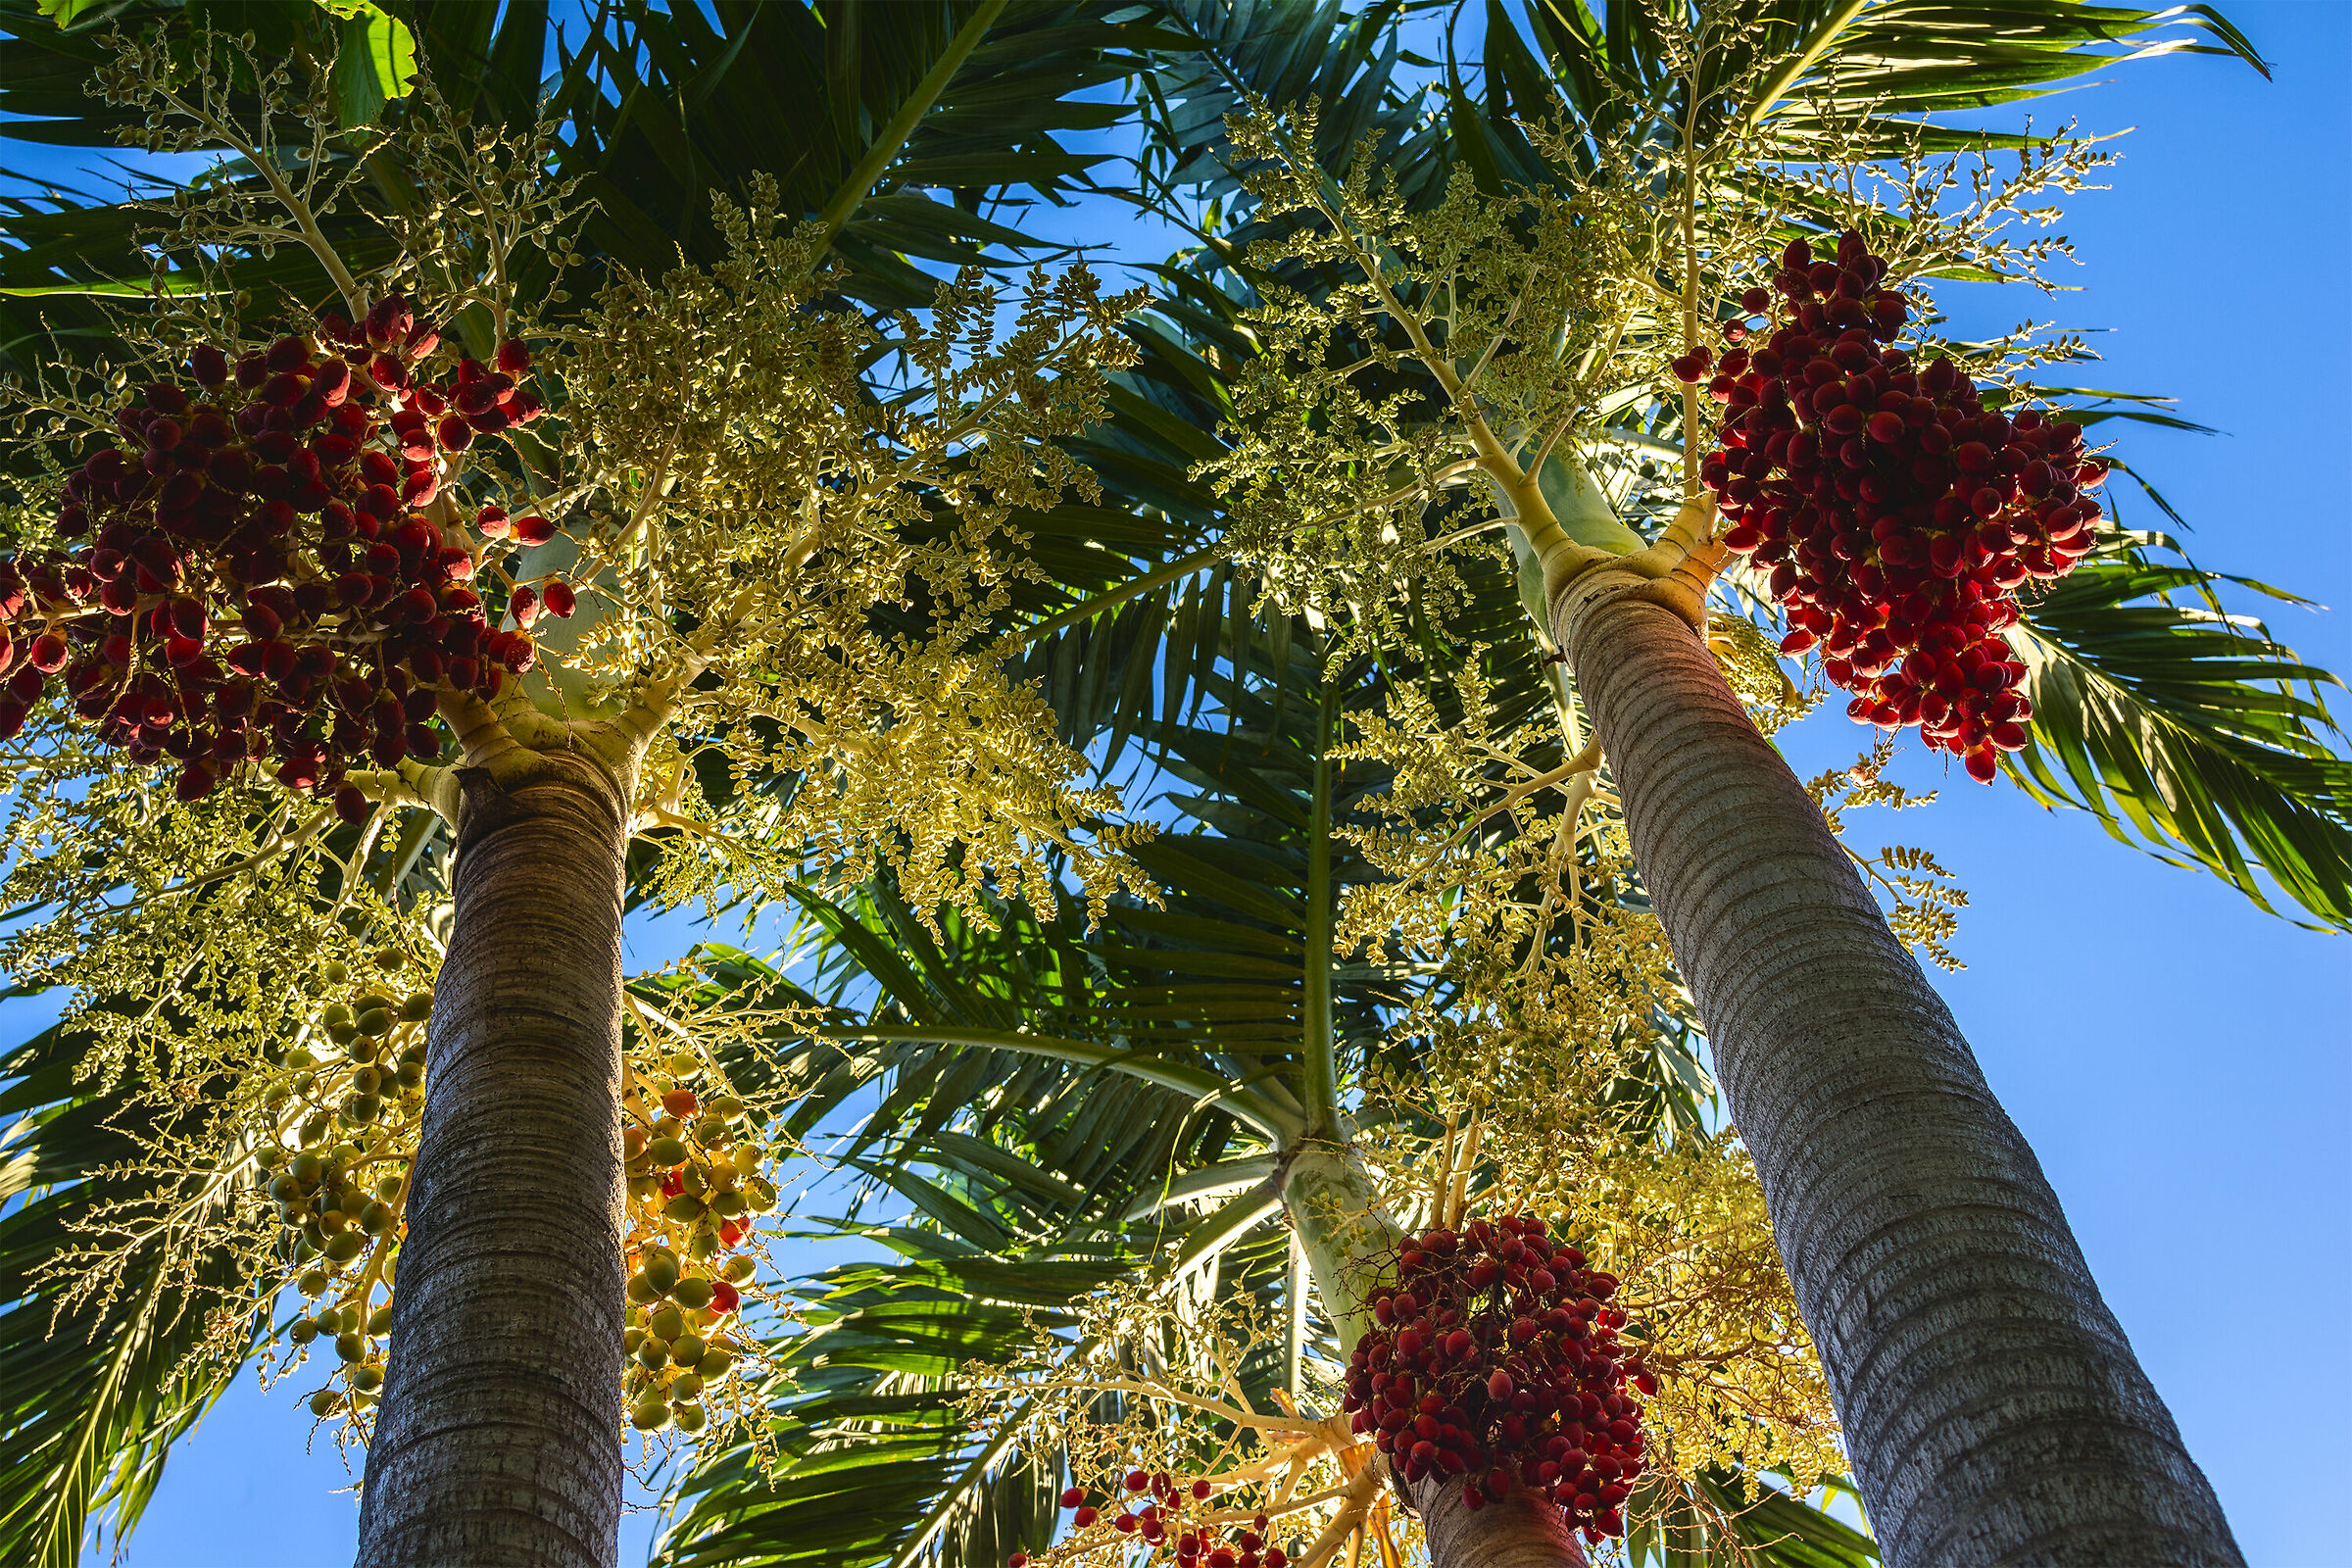 Palm trees with fruits...